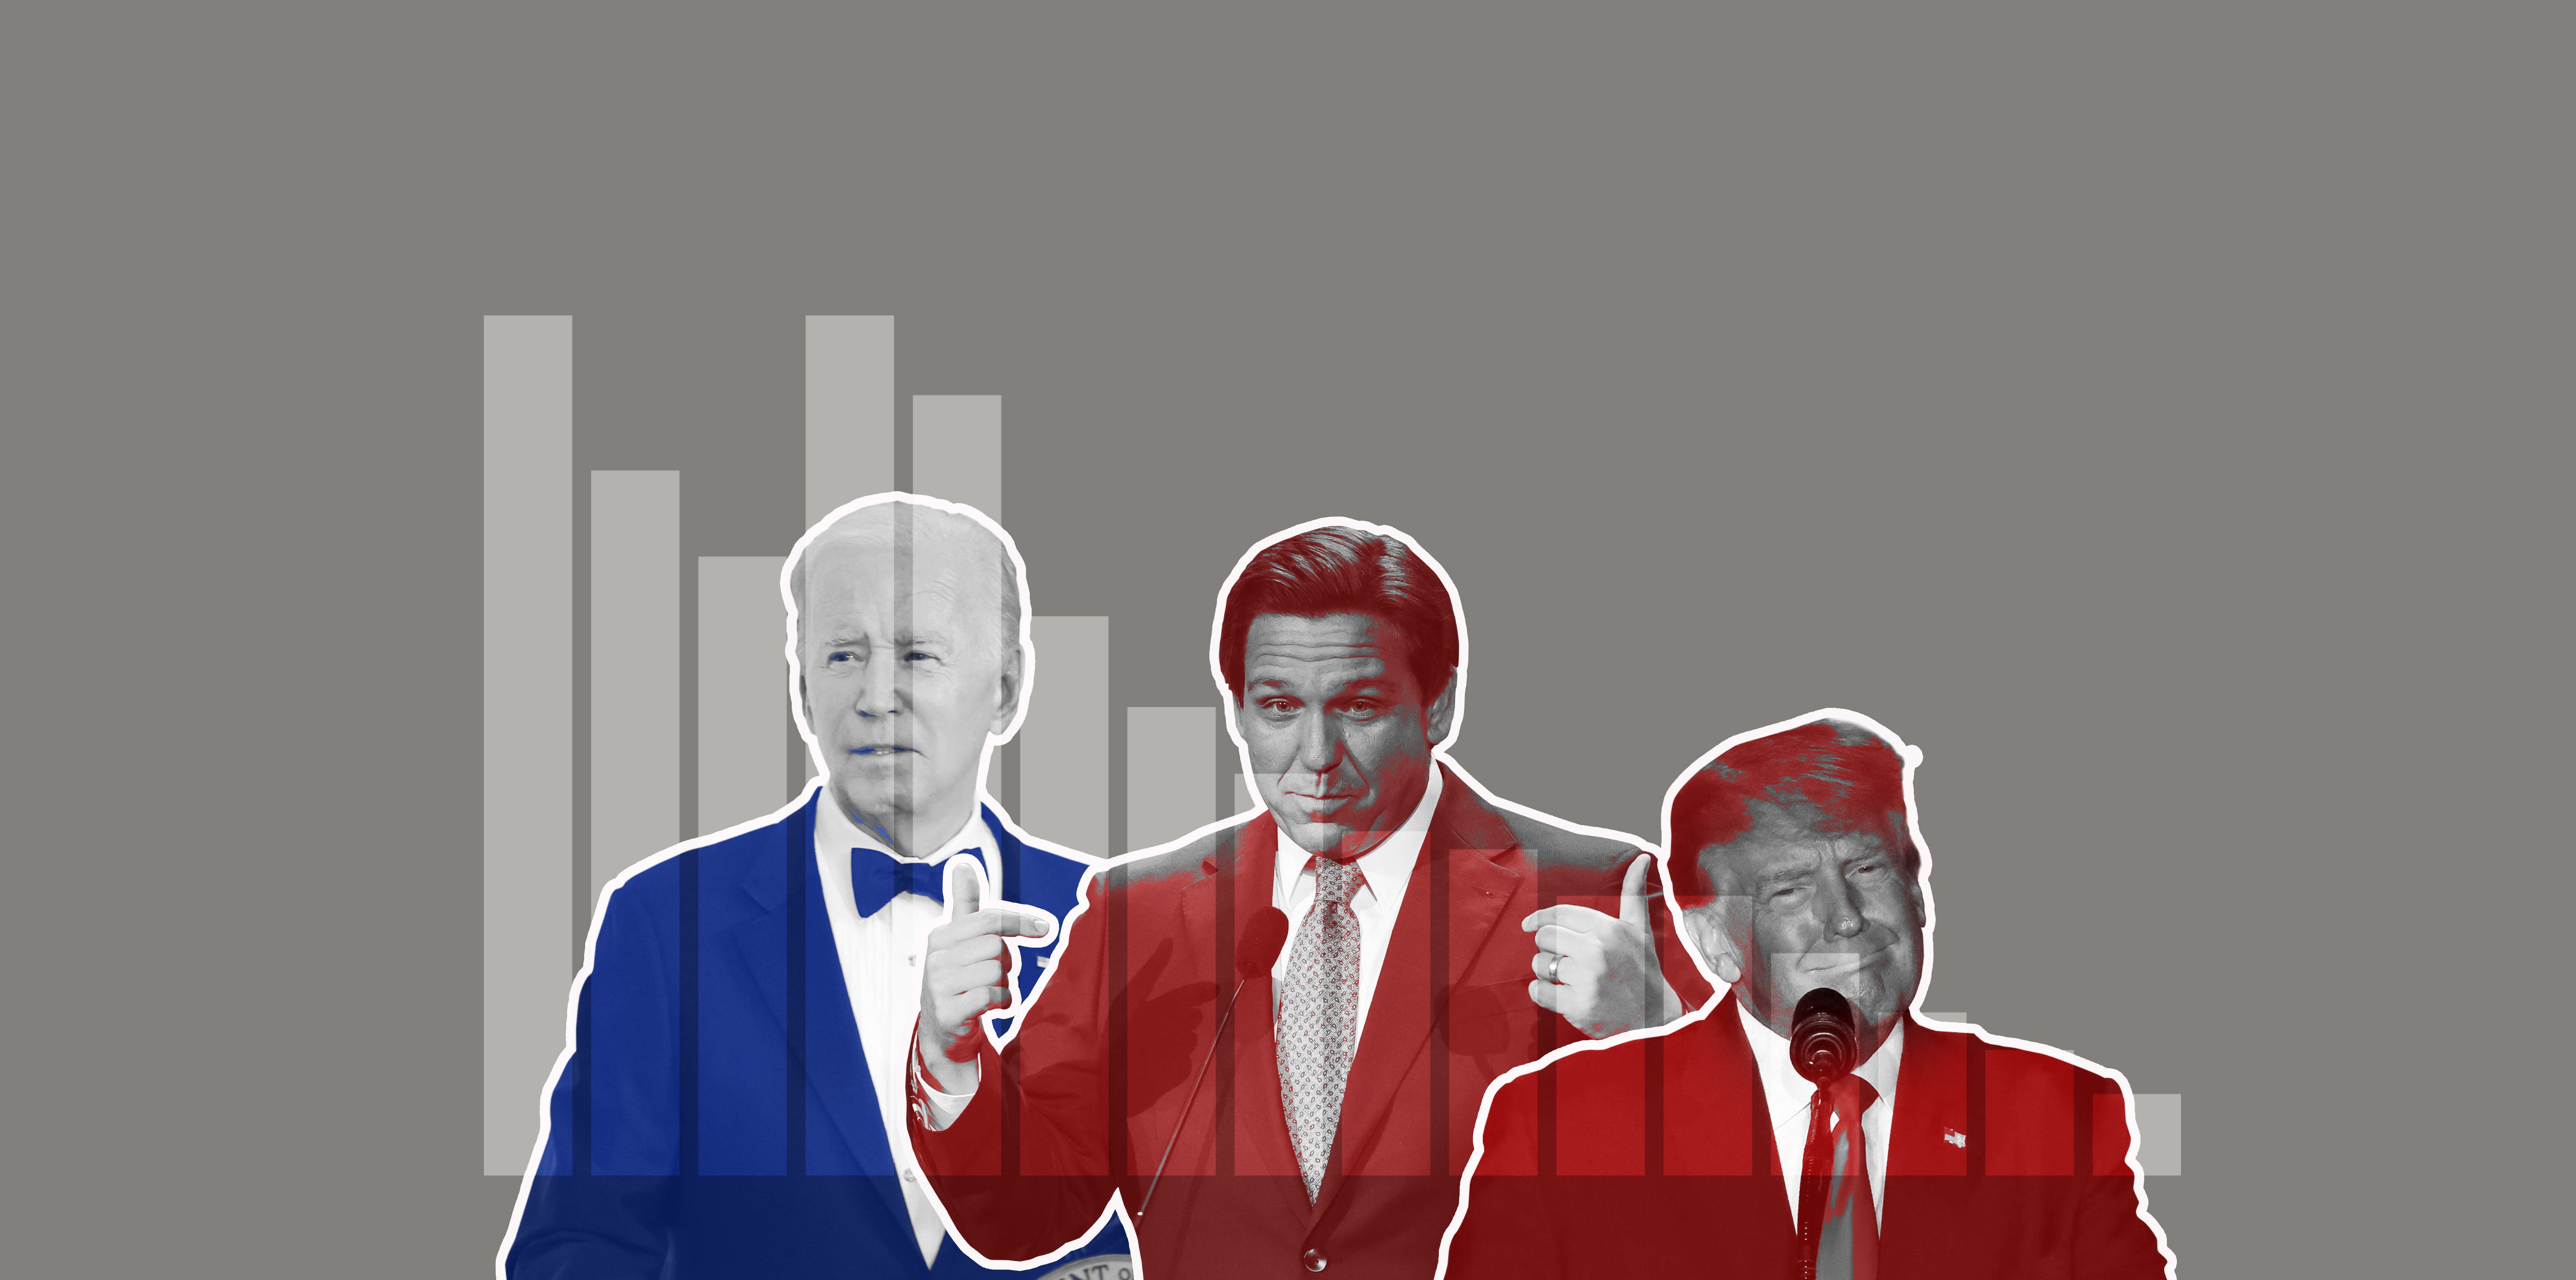 Charts show how Trump's 2024 presidential bid is losing steam